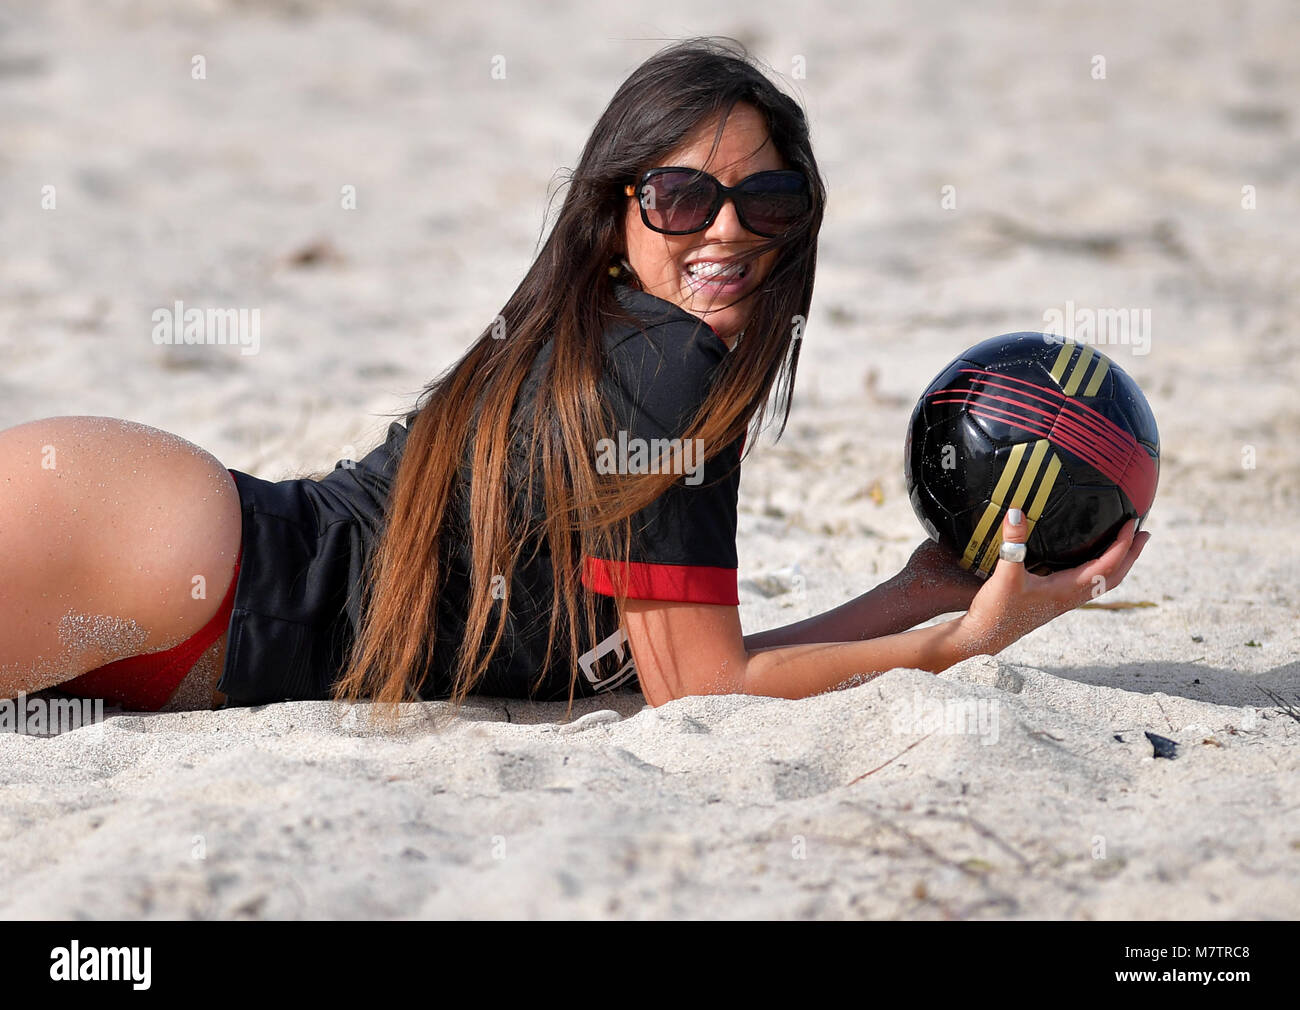 MIAMI, FL - MARCH 12:. Claudia Romani seen wearing a  Fly Emirates, Real Madrid Football Club jersey in Miami Florida on March 12, 2018.  Credit: Hoo-Me.com / MediaPunch  Transmission Ref:  FLXX Stock Photo